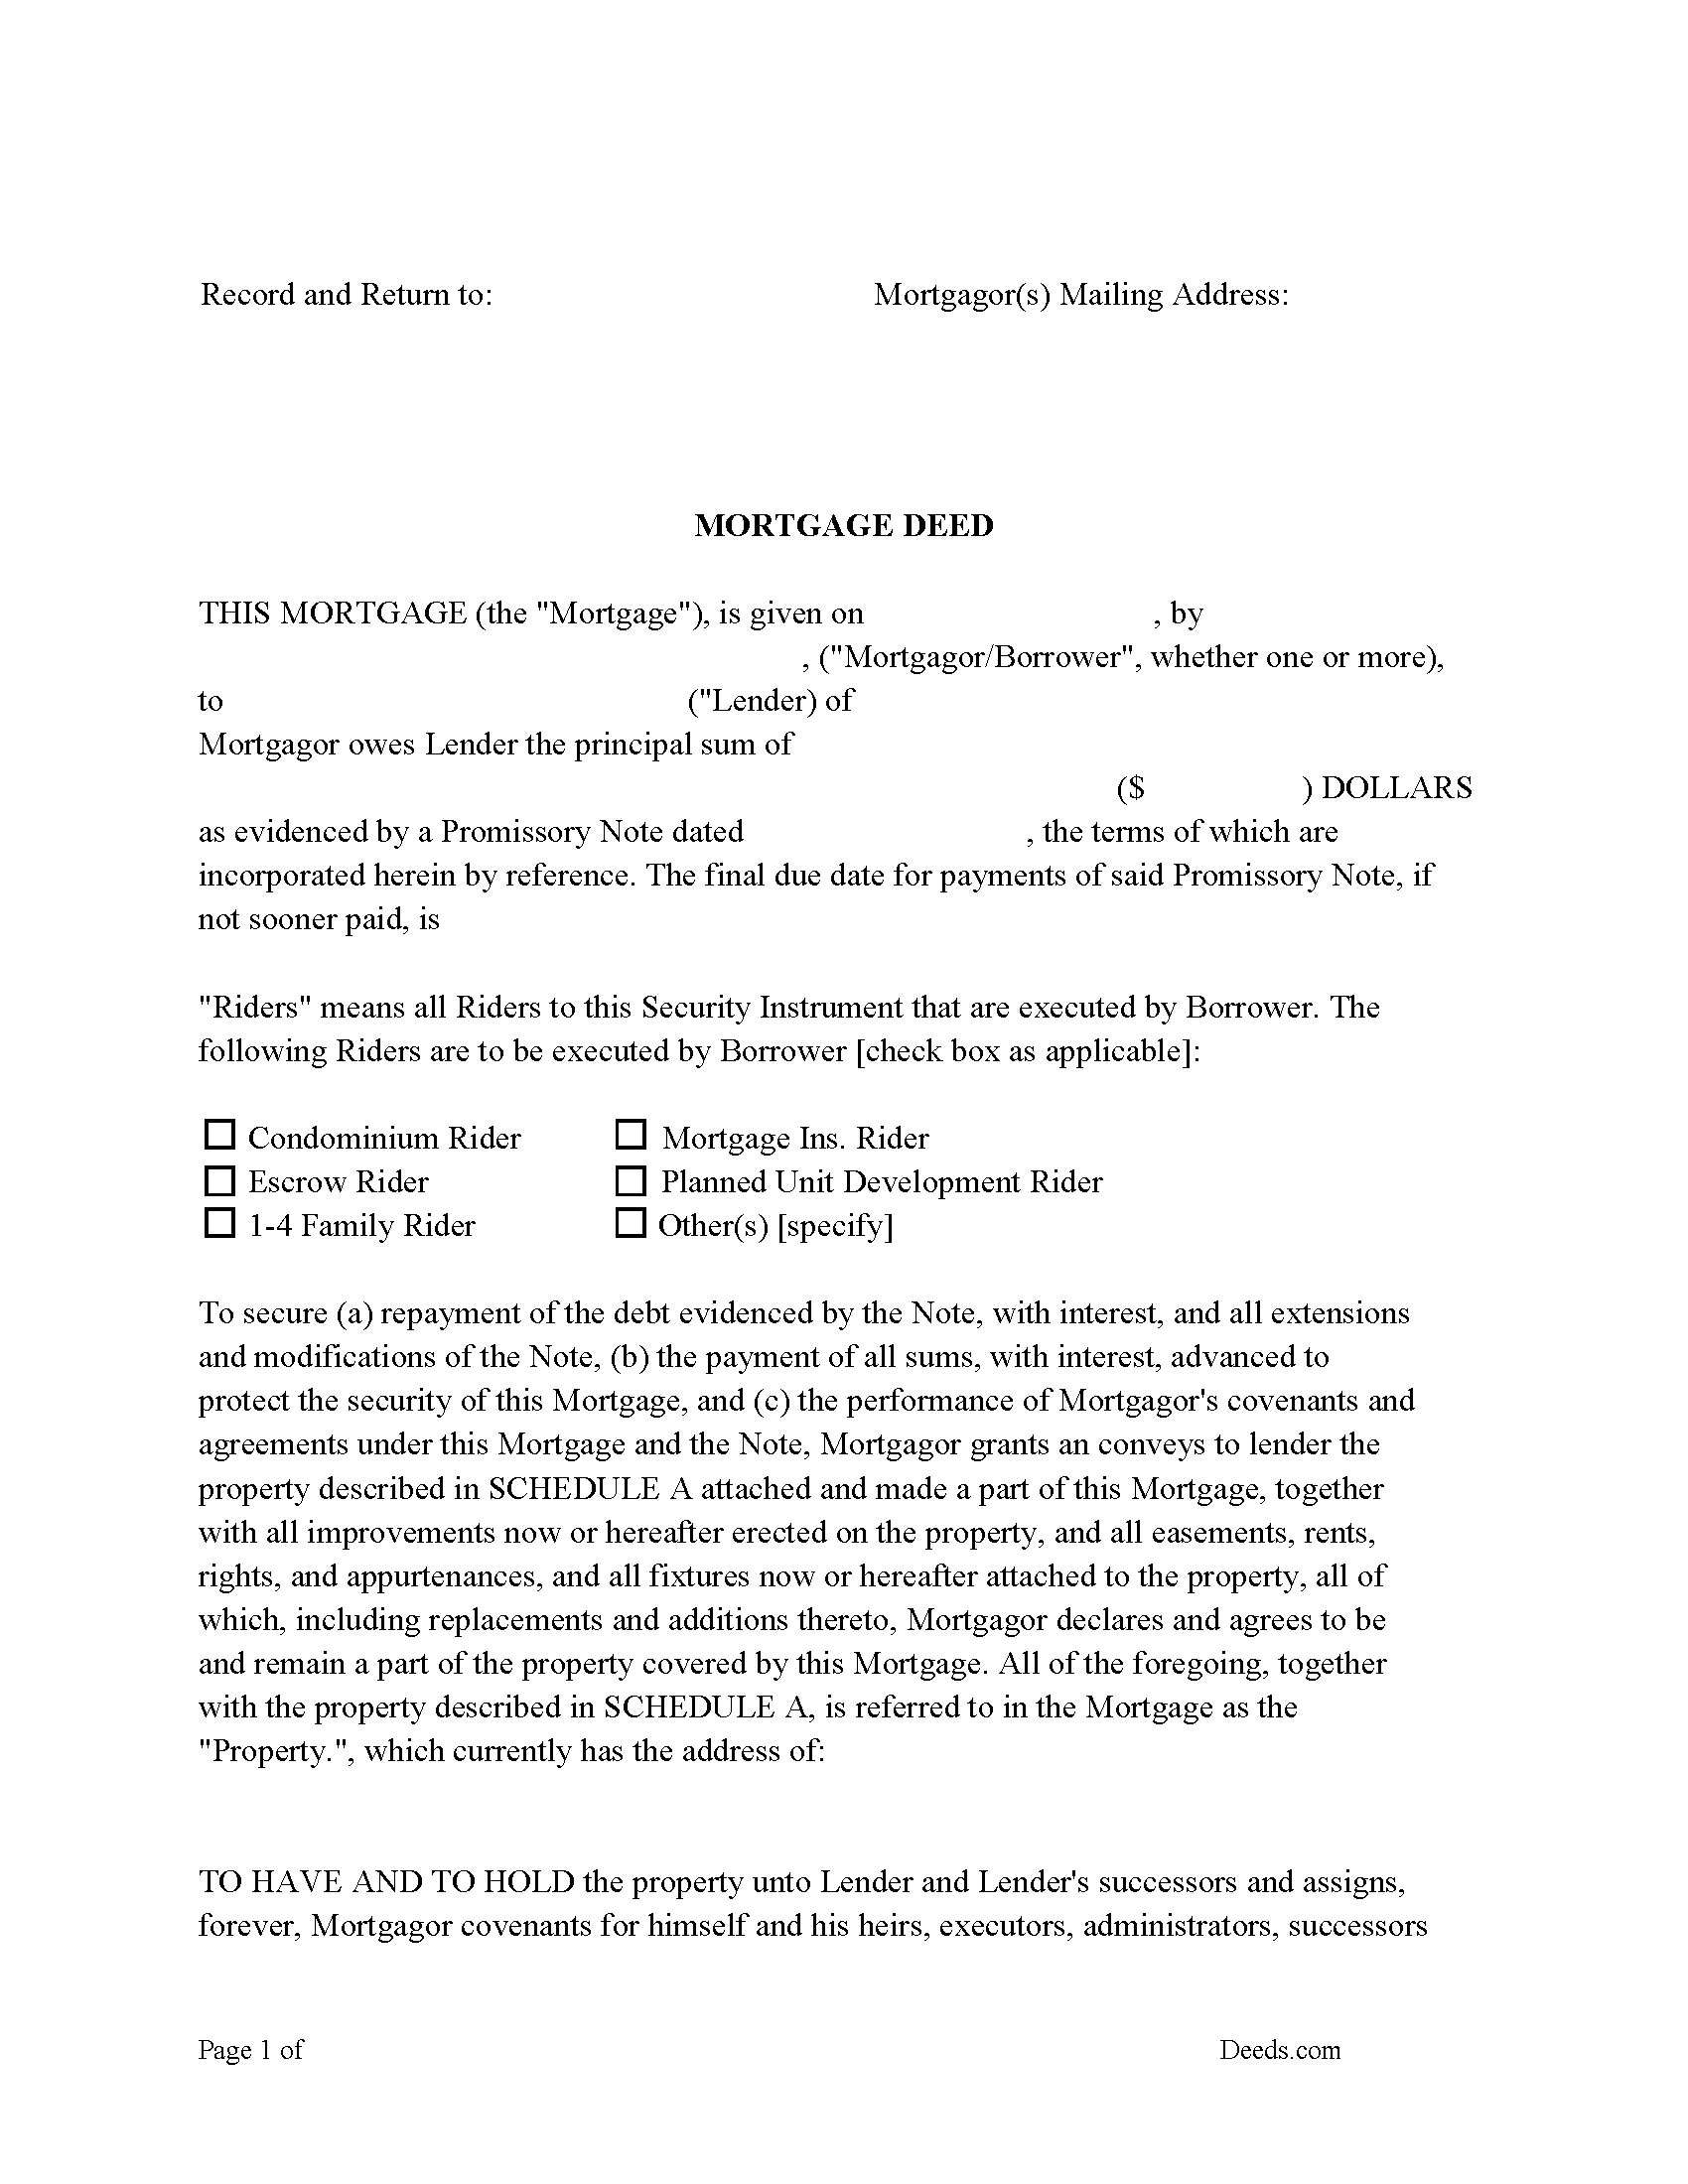 Connecticut Mortgage Deed Form Image